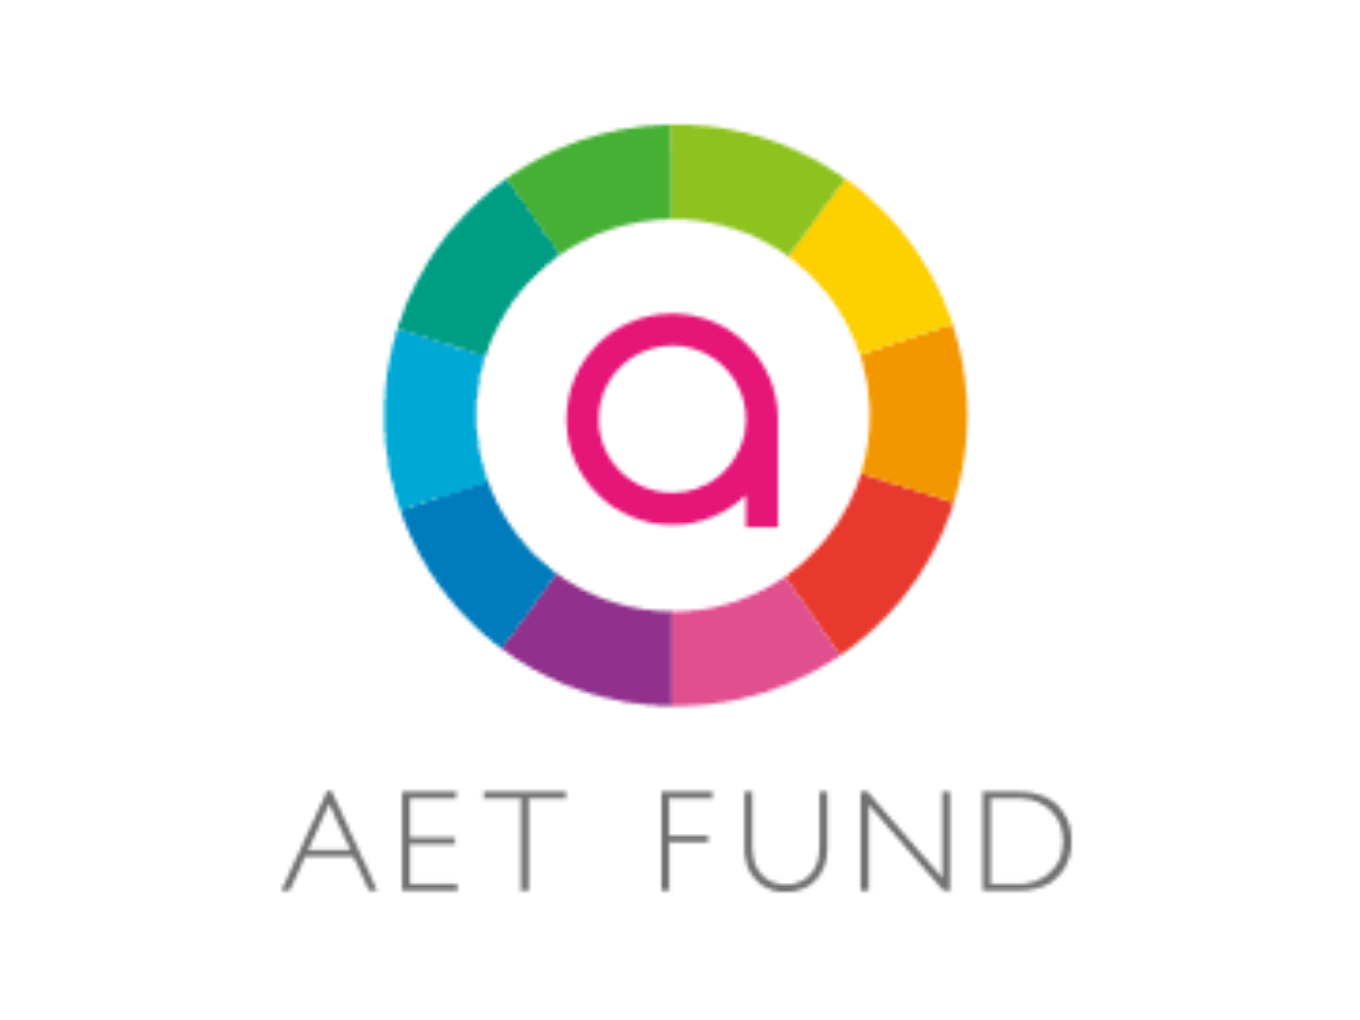 Japanese AET Fund Is Looking To Invest In Vernacular Indian Startups